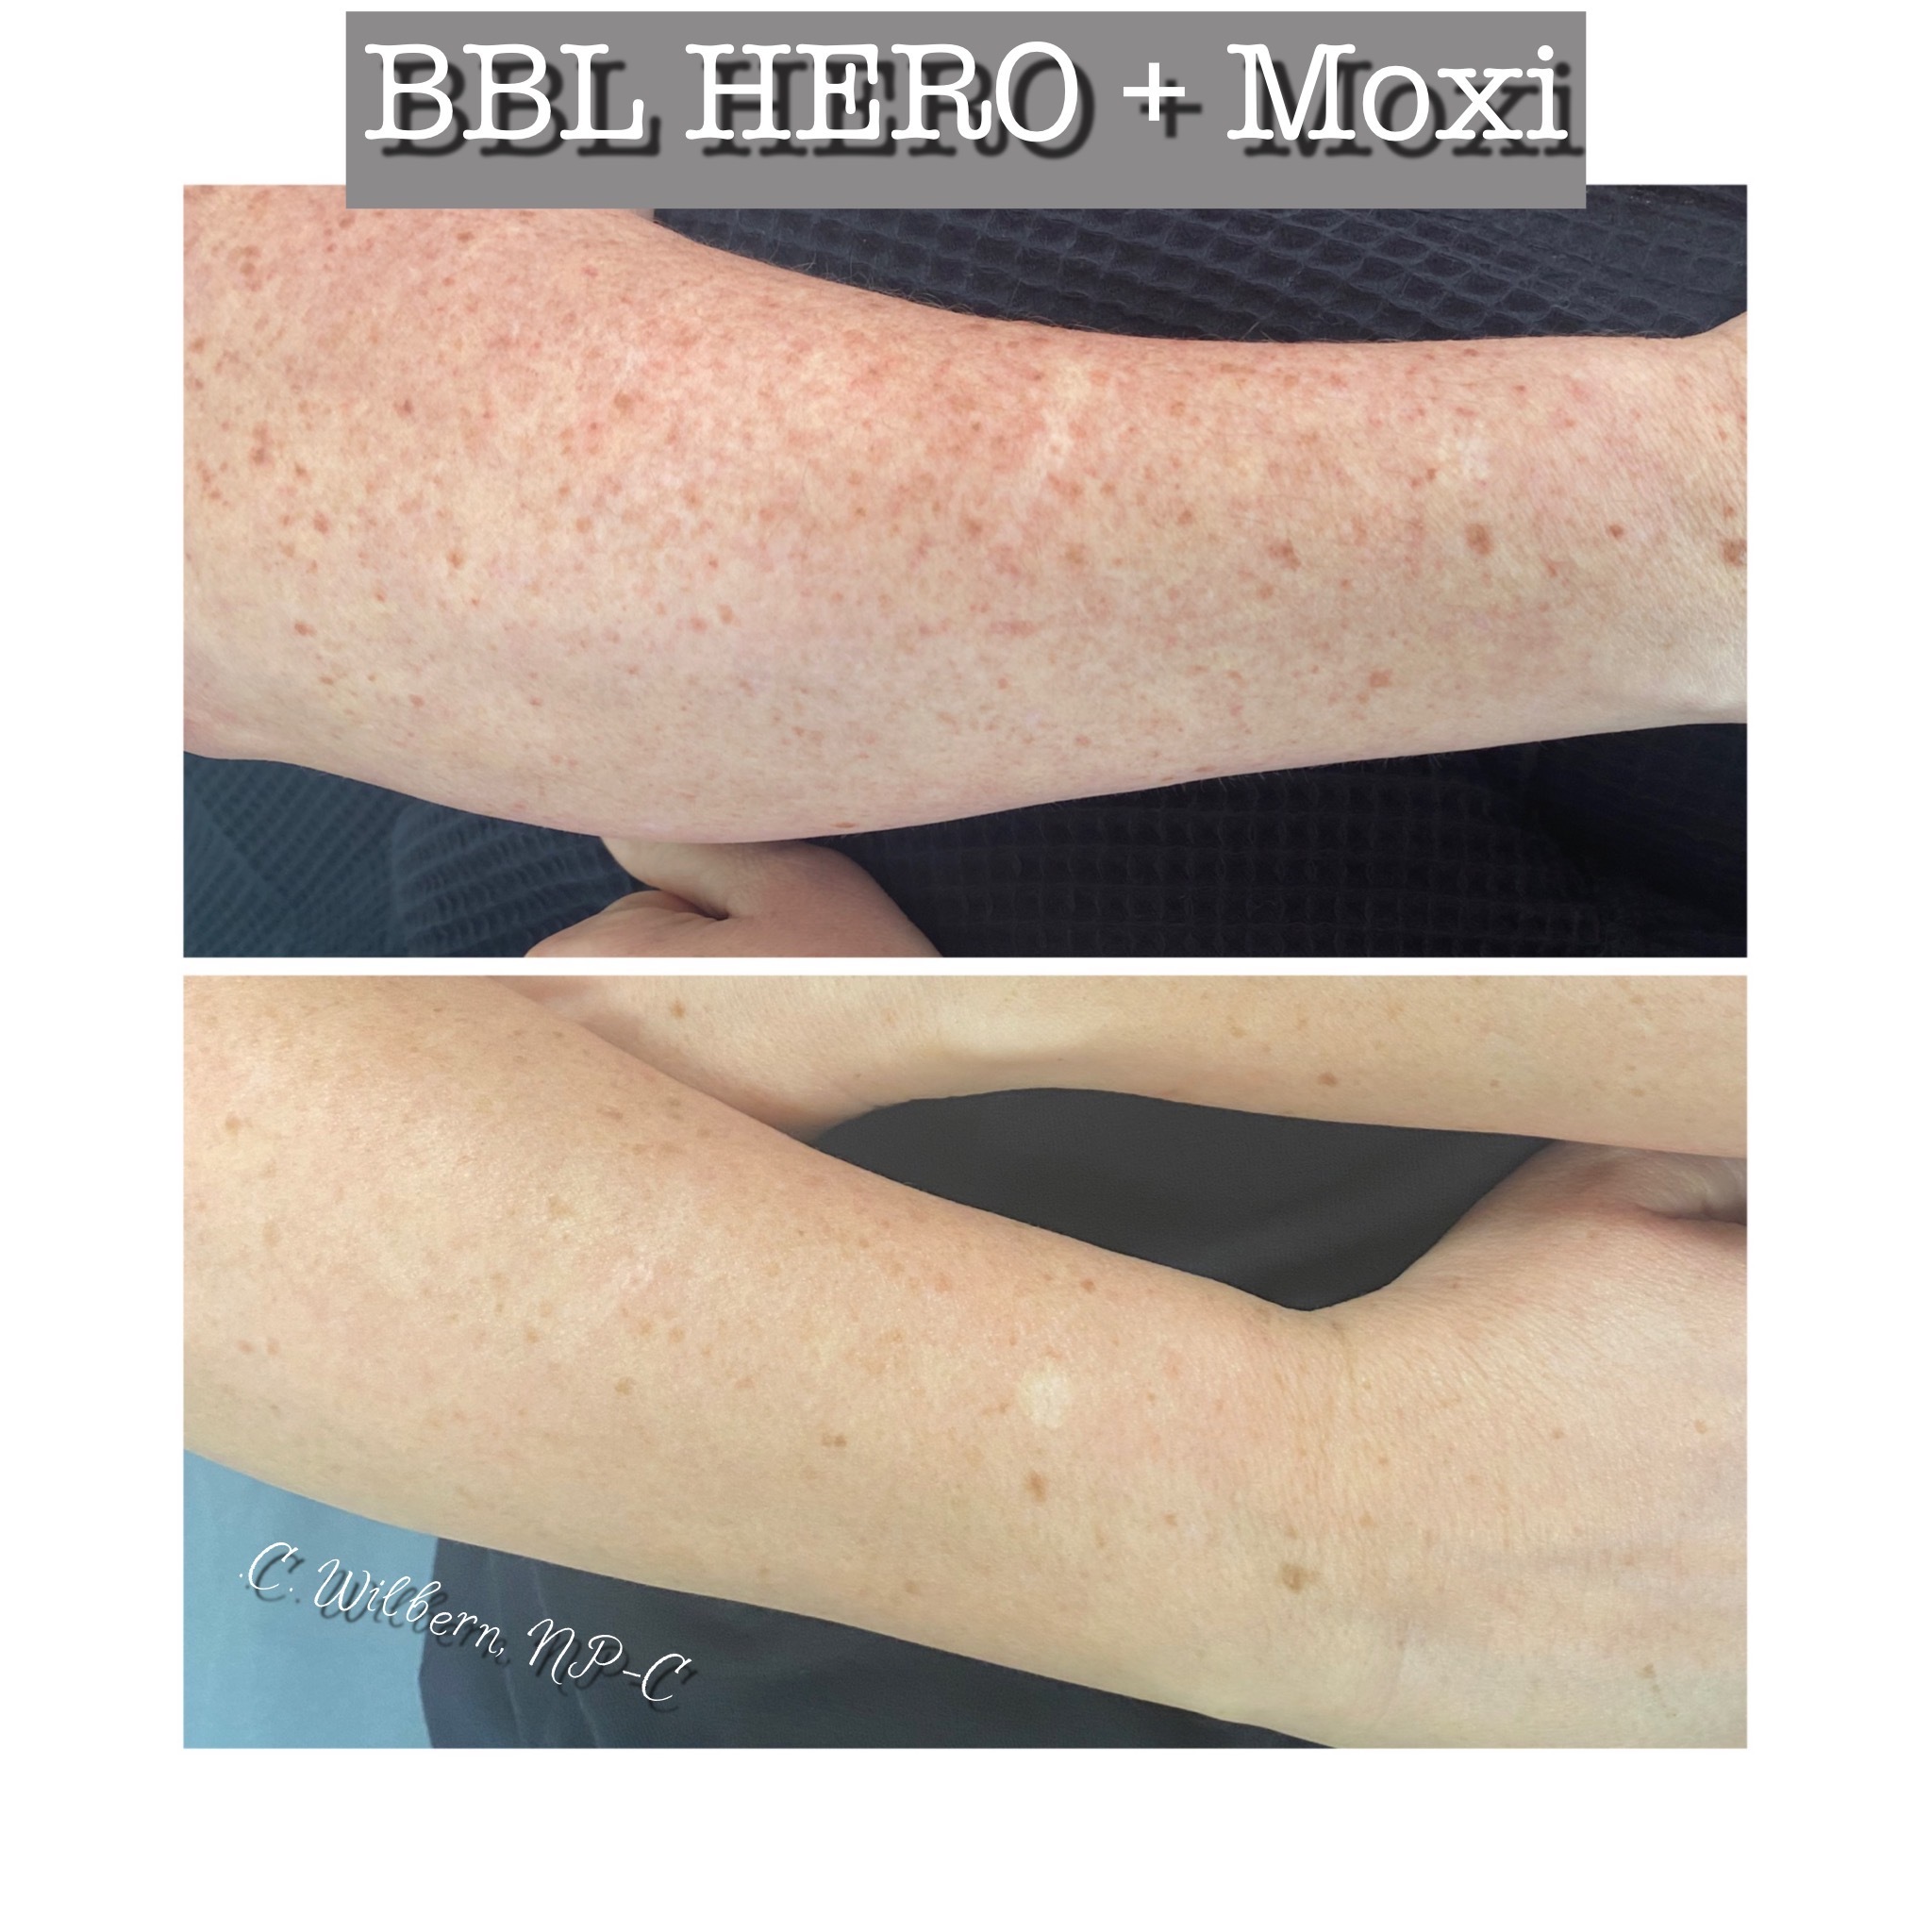 BBL Hero+ Moxi before and after